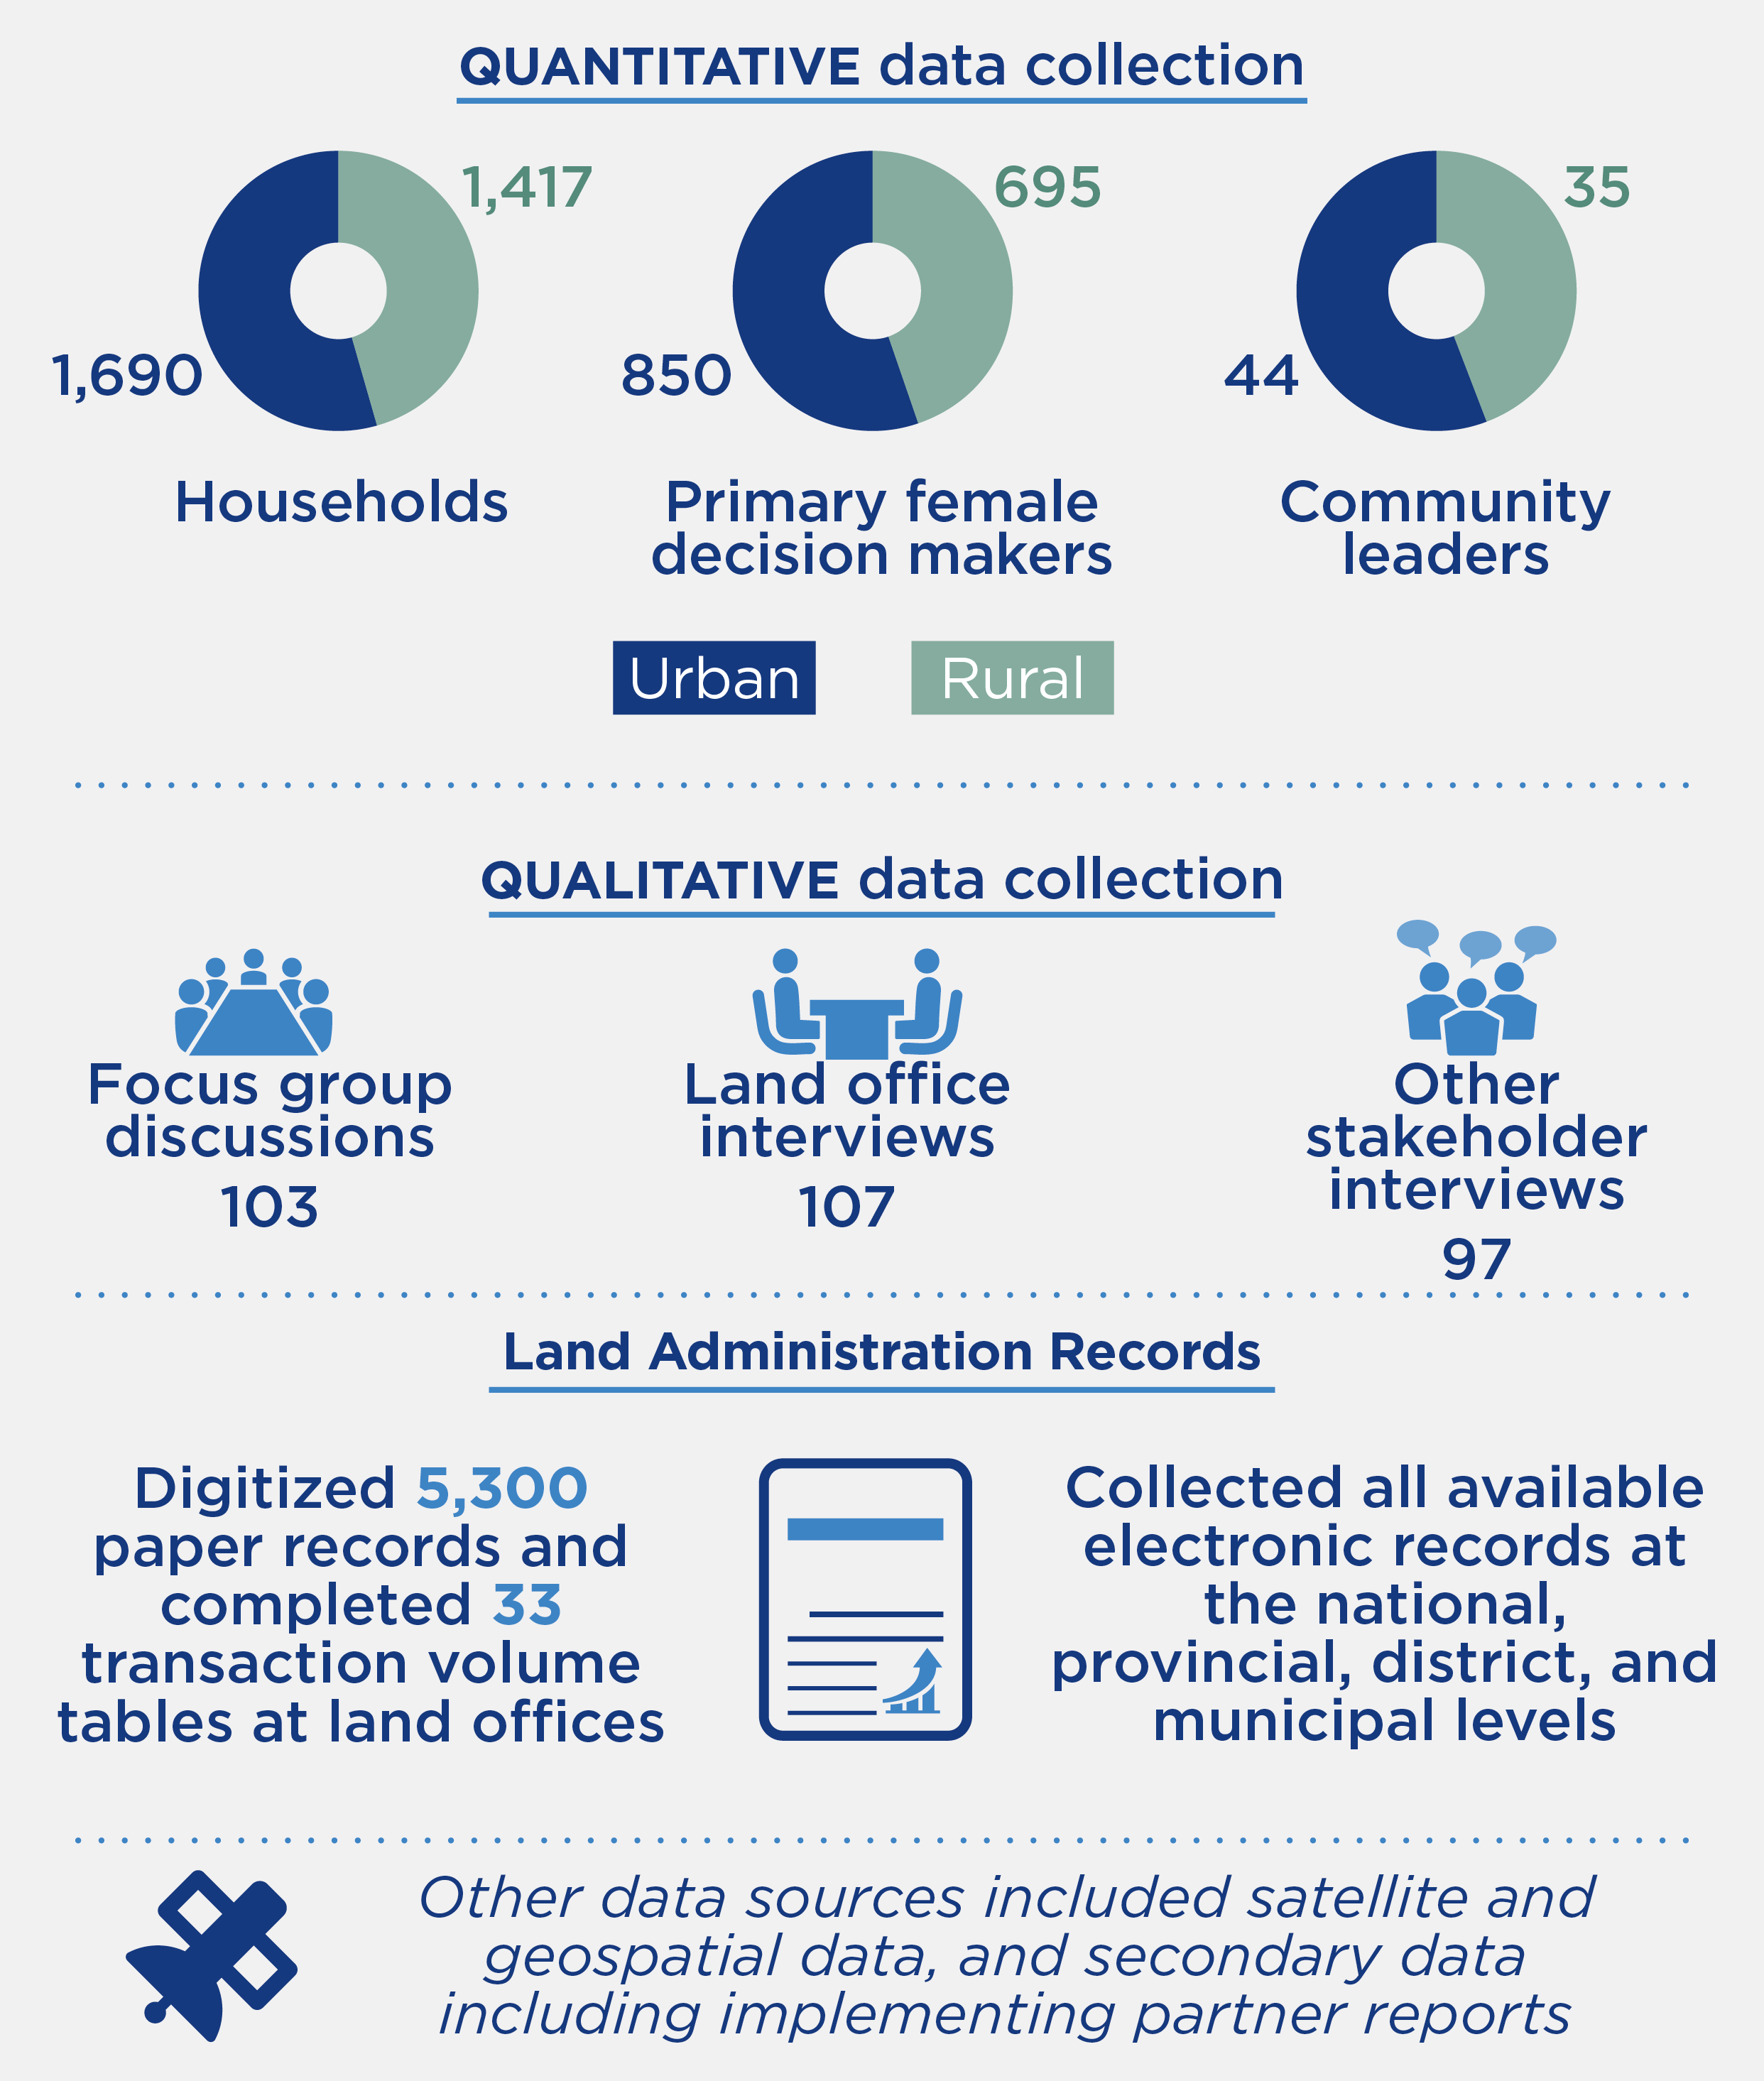 Quantitative data collection included 1,690 hosueholds in urban areas and 1,417 households in rural areas; 850 primary female decision makers in urban areas, and 695 in rural; and 44 community leaders in urban areas, and 35 in rural. Qualitative data collection included 103 focus group discussions, 107 land office interviews, and 97 interviews from other stakeholders. Land administration records included digitized 5,300 paper records and completed 33 transaction volume tables at land offices. This also included collection of all available electronic records at the national, provincial, district and municipal levels. Other data sources included satellite and geospatial data, and secondary data including implementing partner reports.